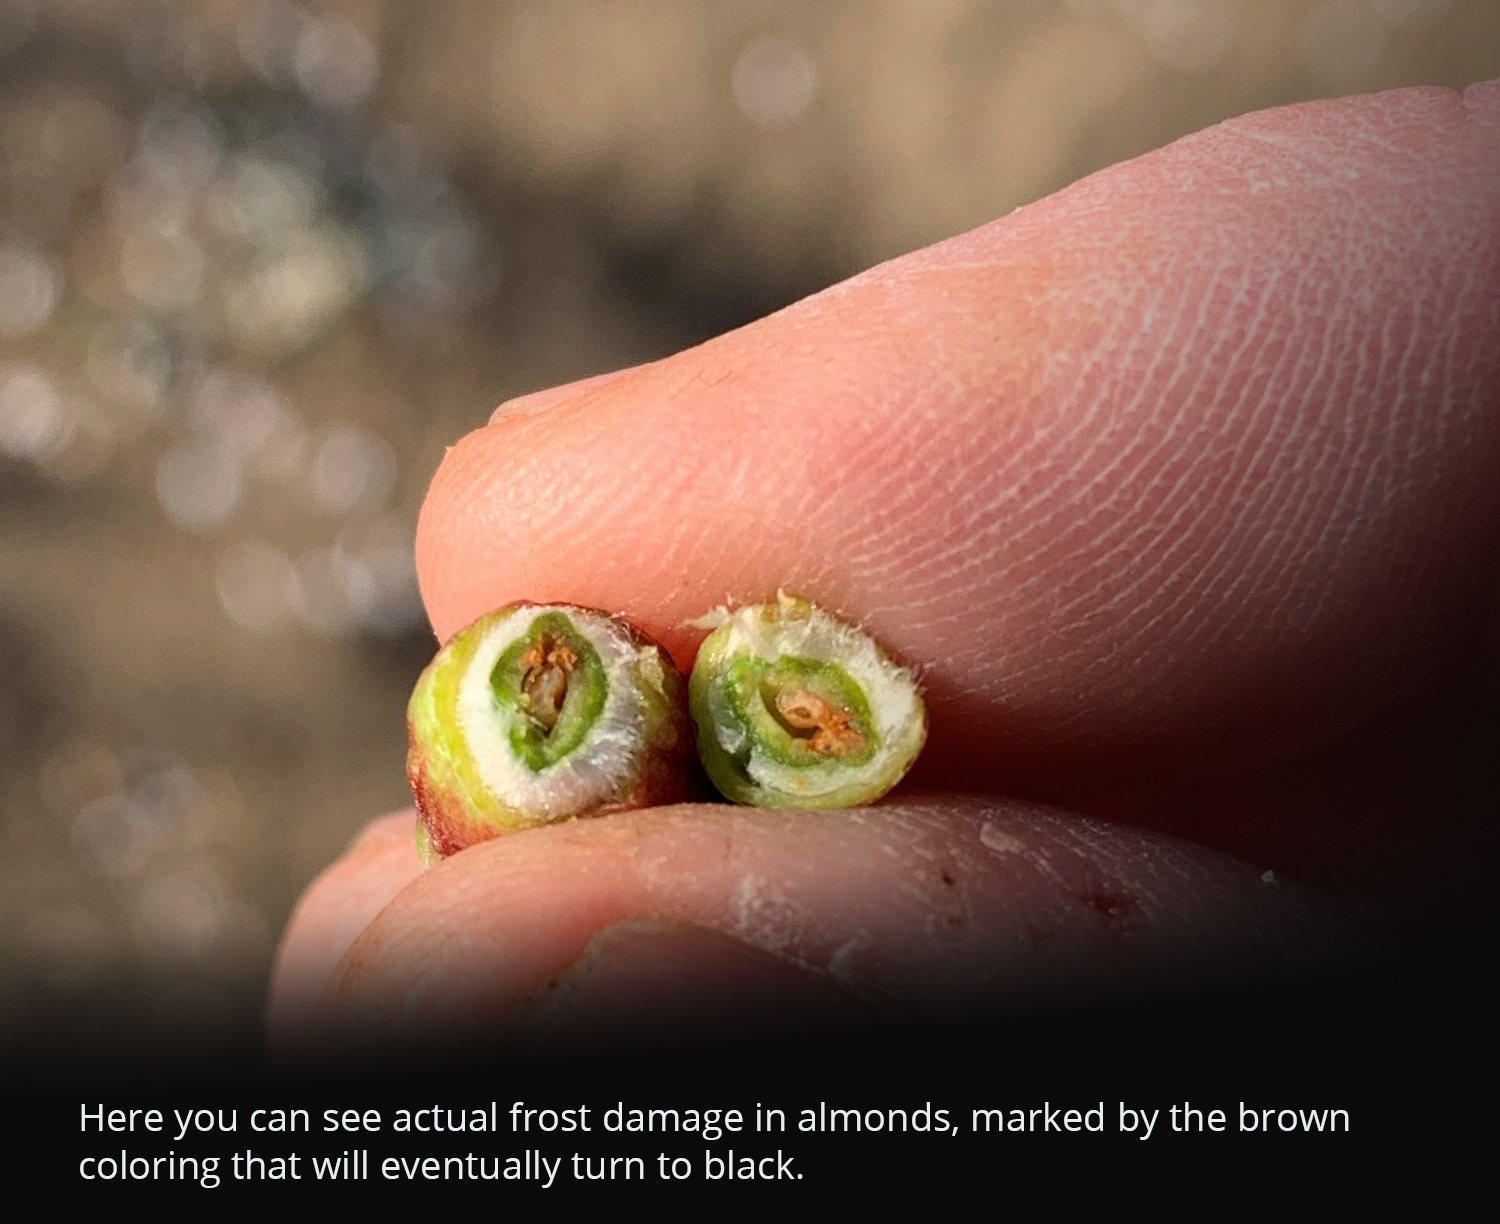 Frost damage in almonds